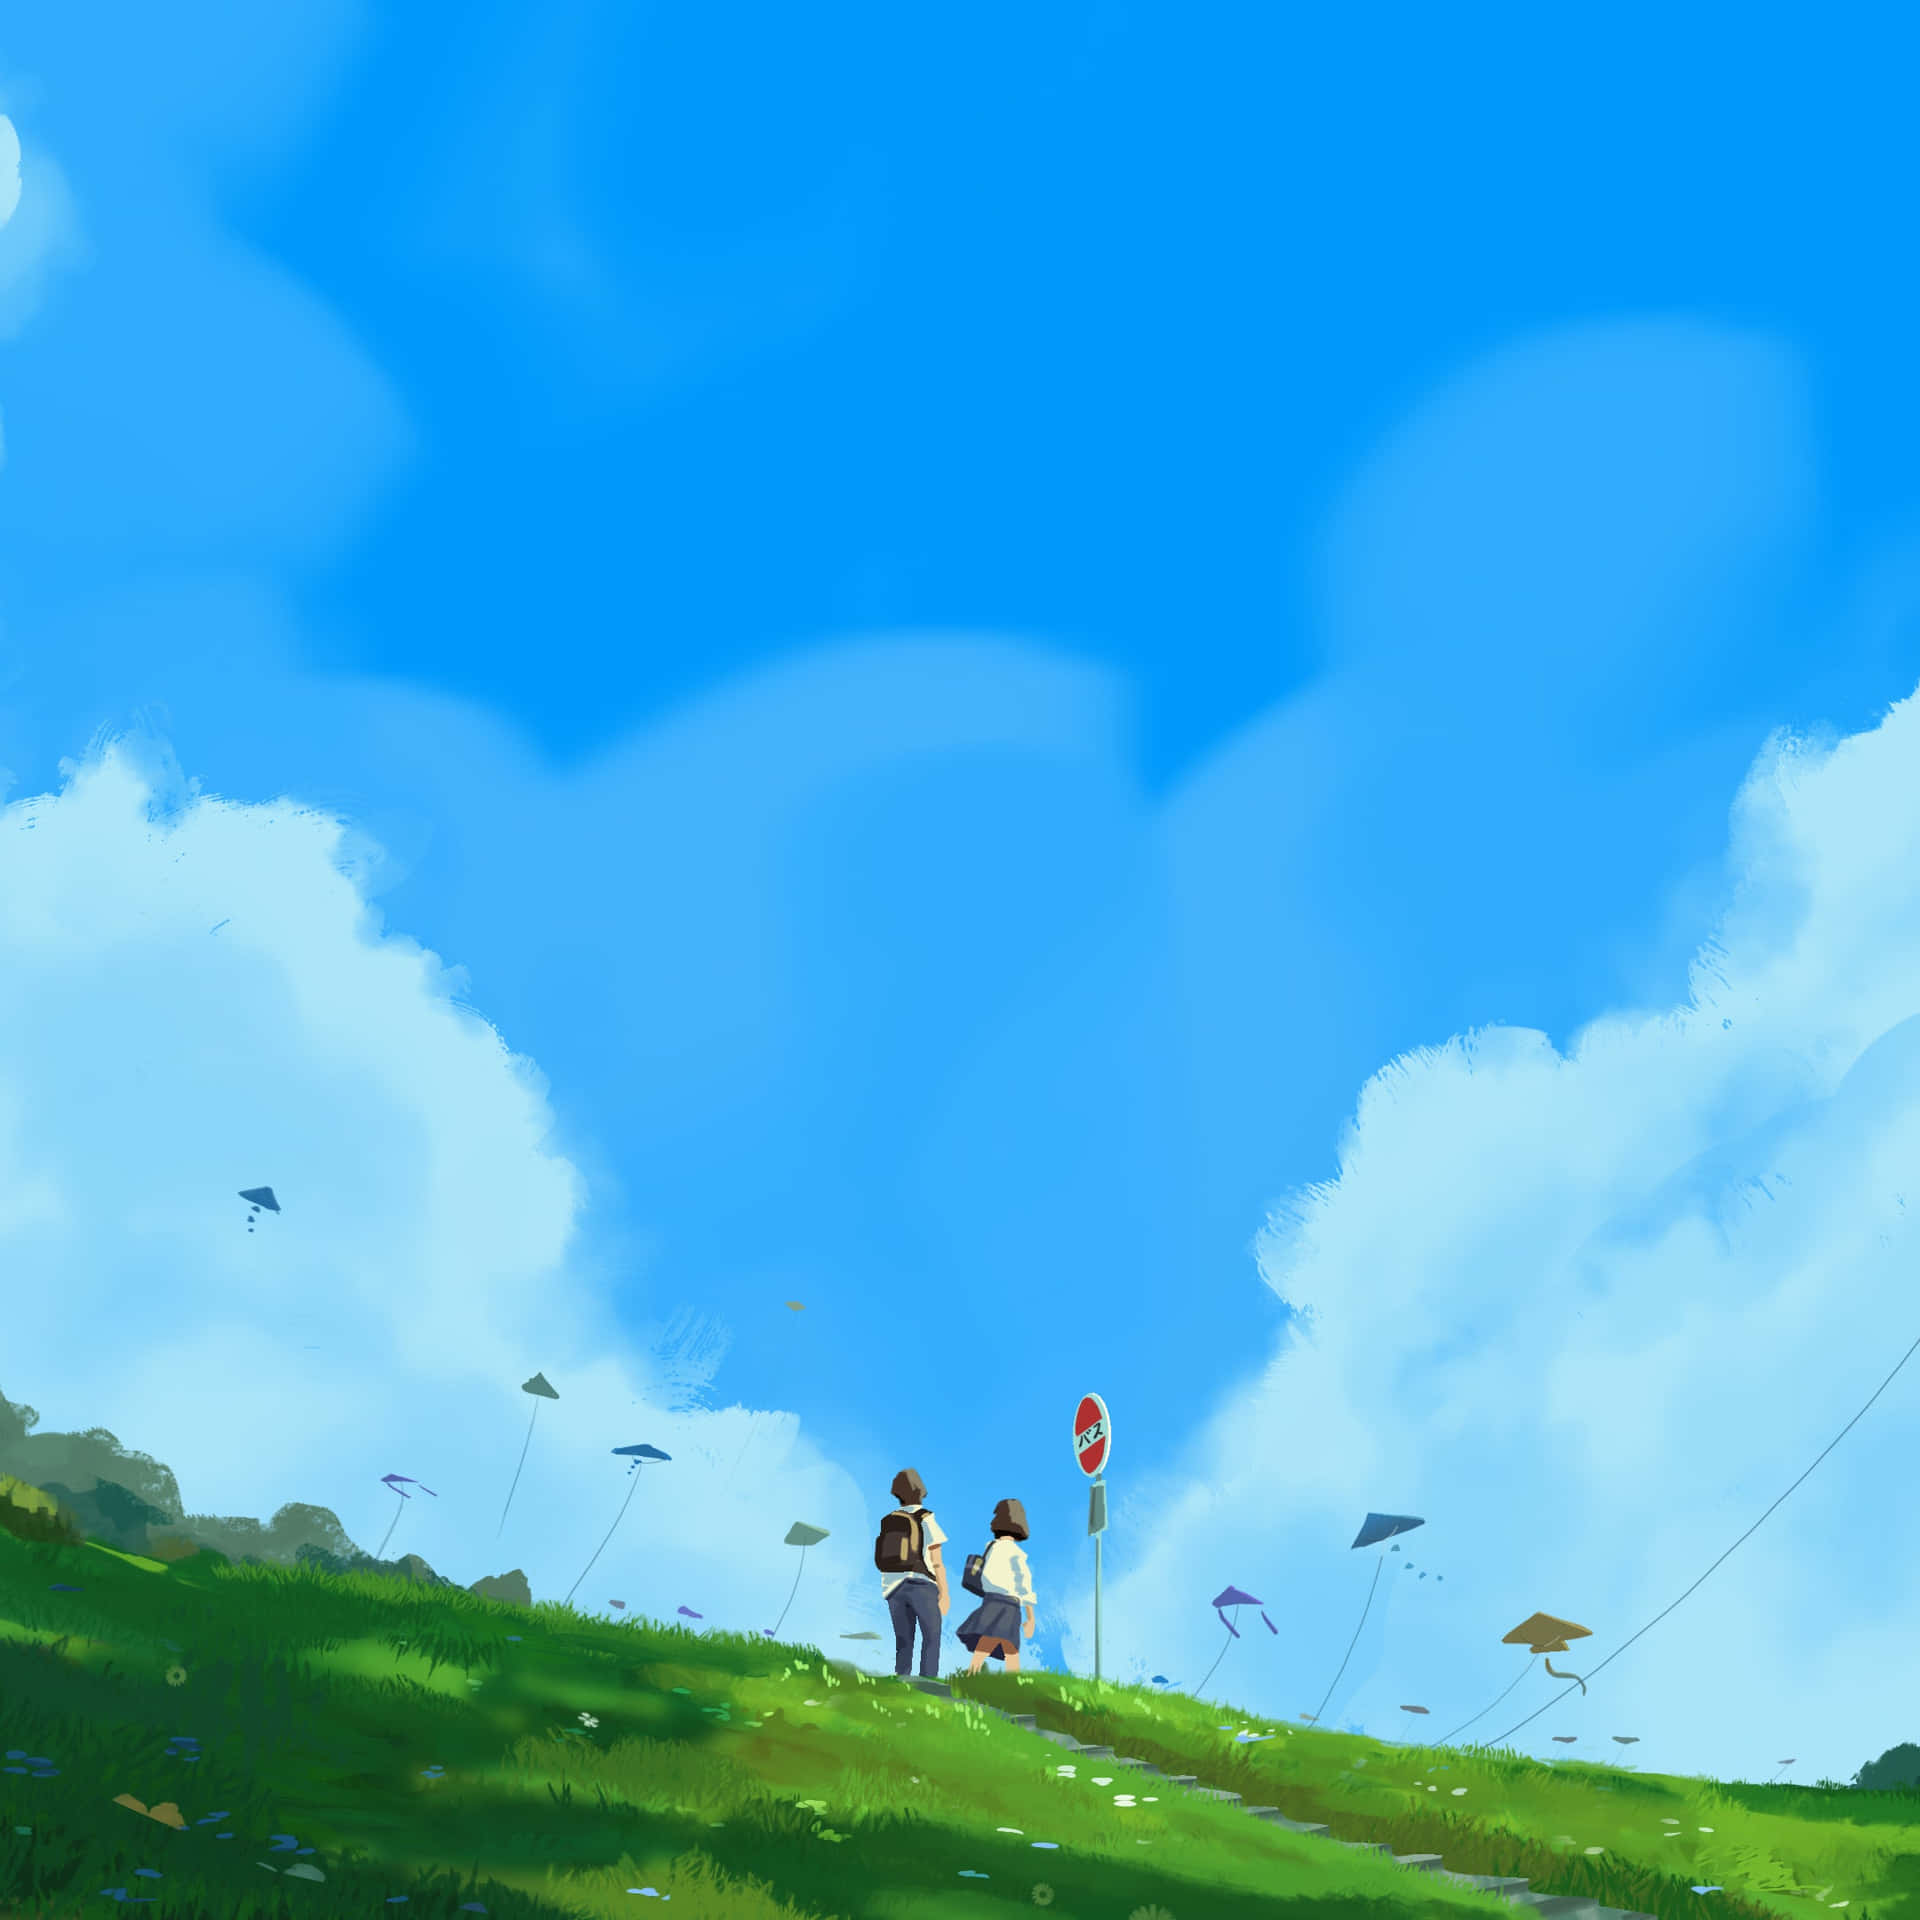 Lo-Fi Anime Chill Couple Watching Flyvende Kites Wallpaper